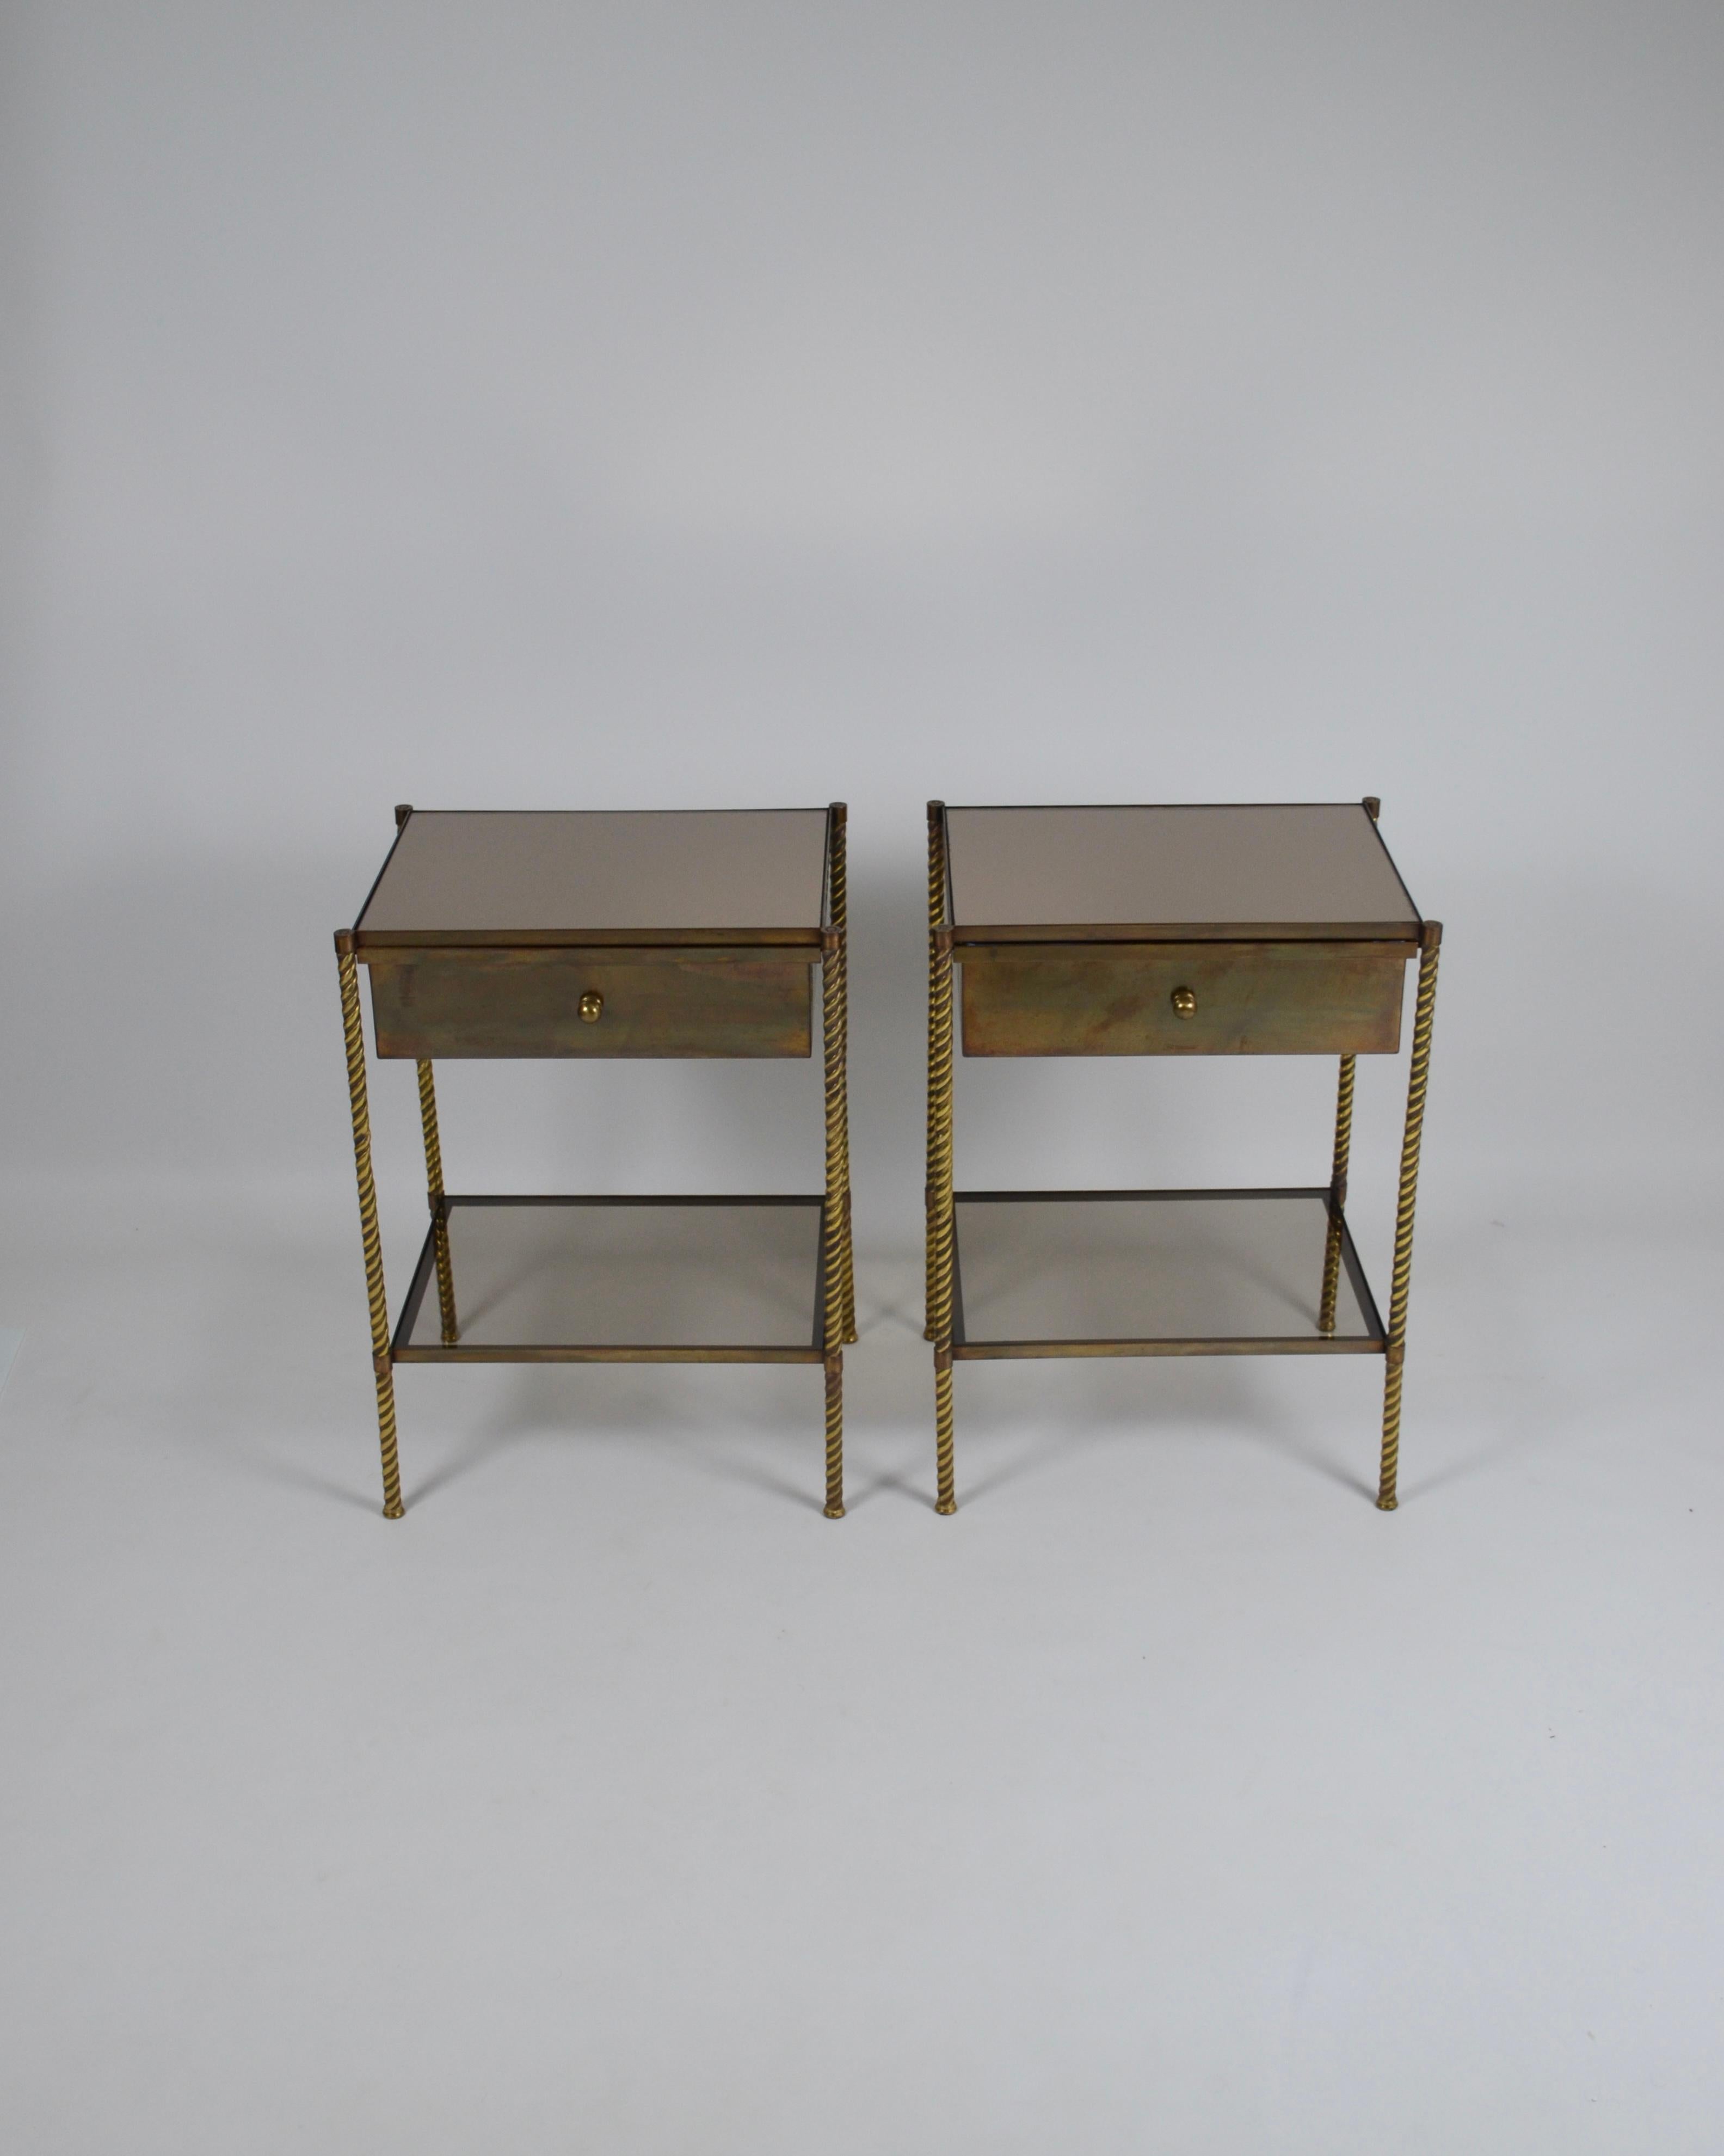 Pair of neoclassical nightstands/end tables in the style of the Maison Jansen or Bagués, France, 1950s/60s.
Brass structure with beautiful patina, composed of 4 fine columns nicely worked and detailed.
Each table has a drawer lined inside with